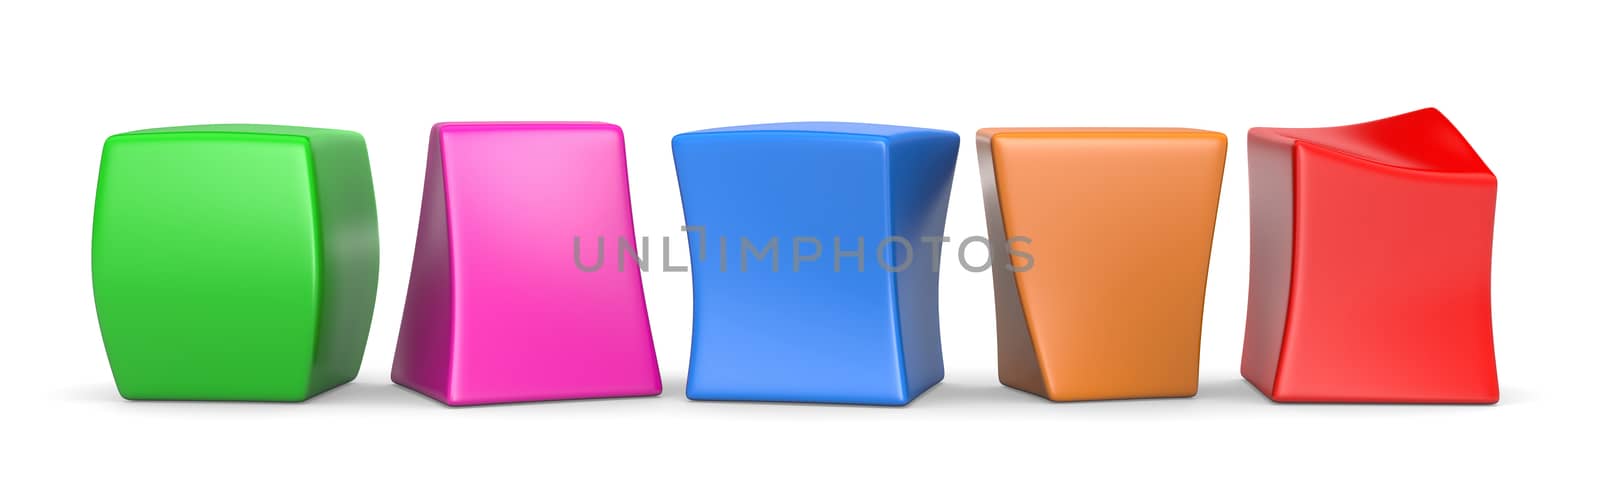 Five Colorful Blank Funny Cubes by make